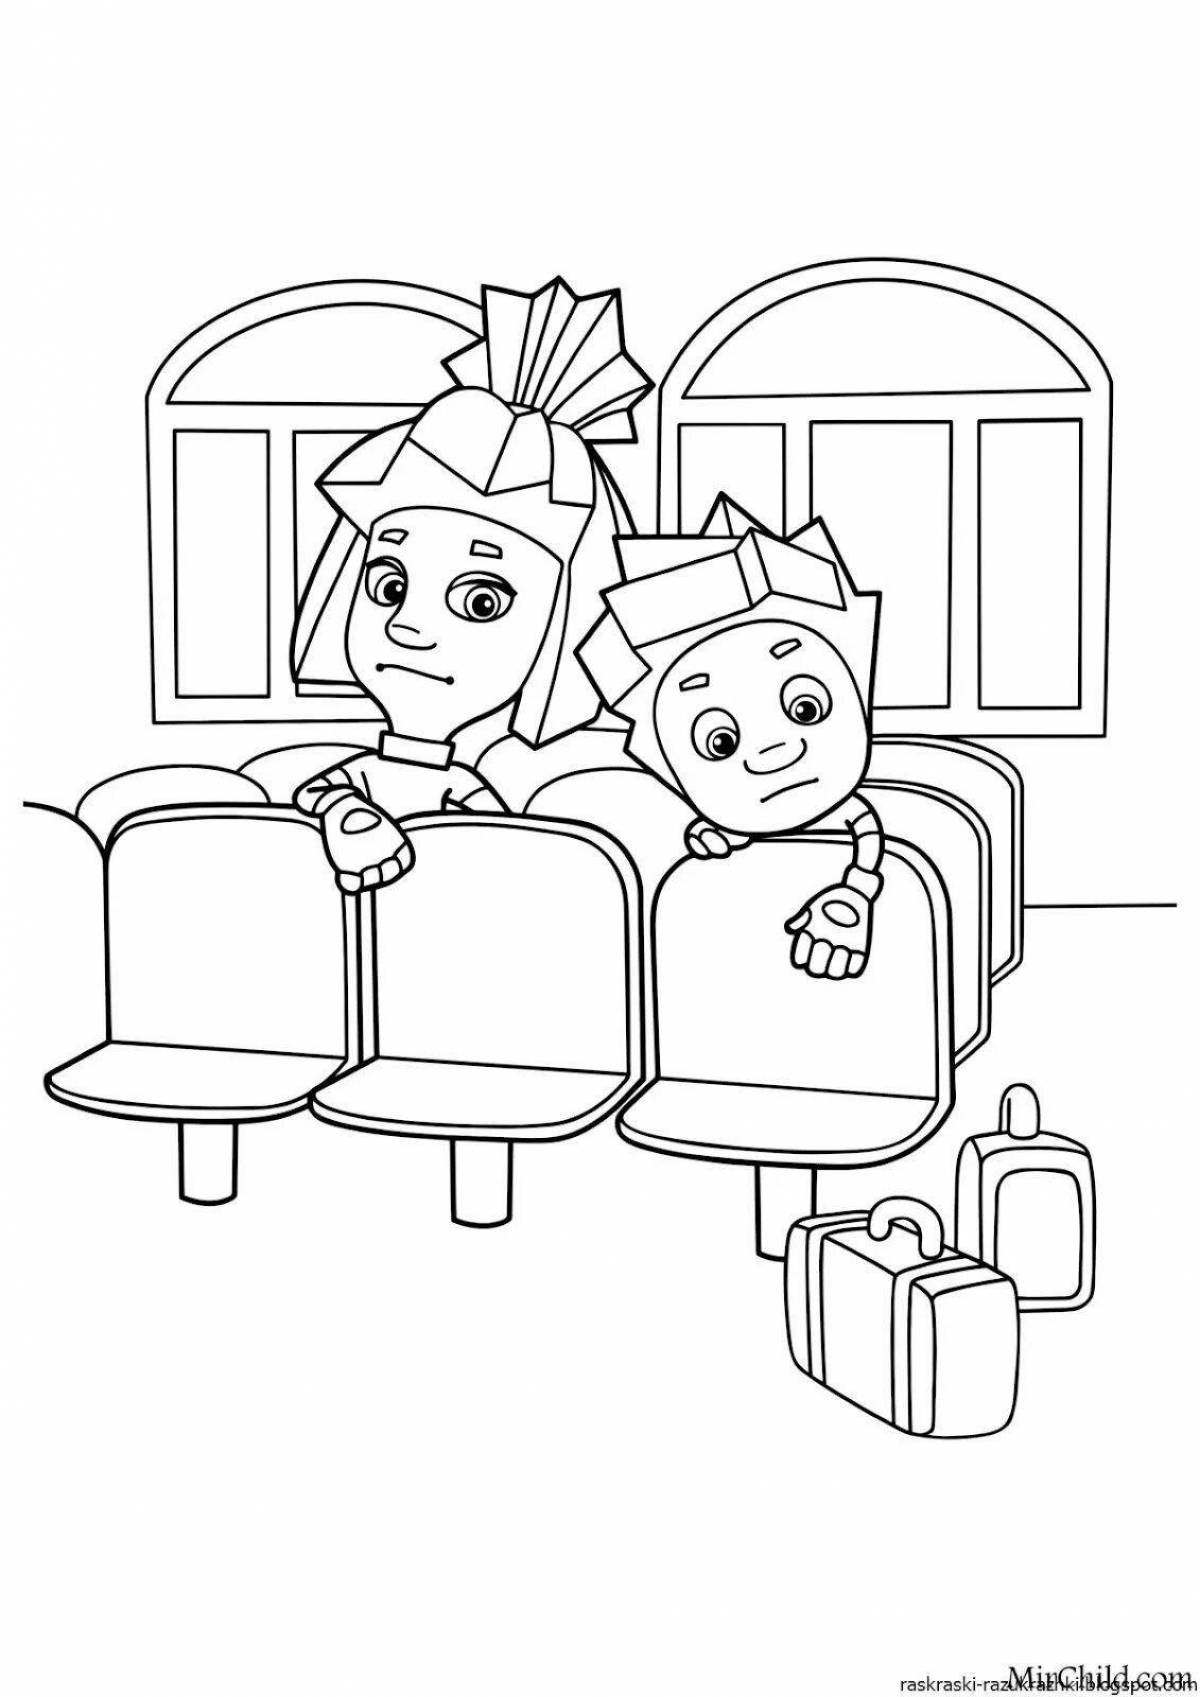 Bright fixies-coloring pages for children 5-6 years old